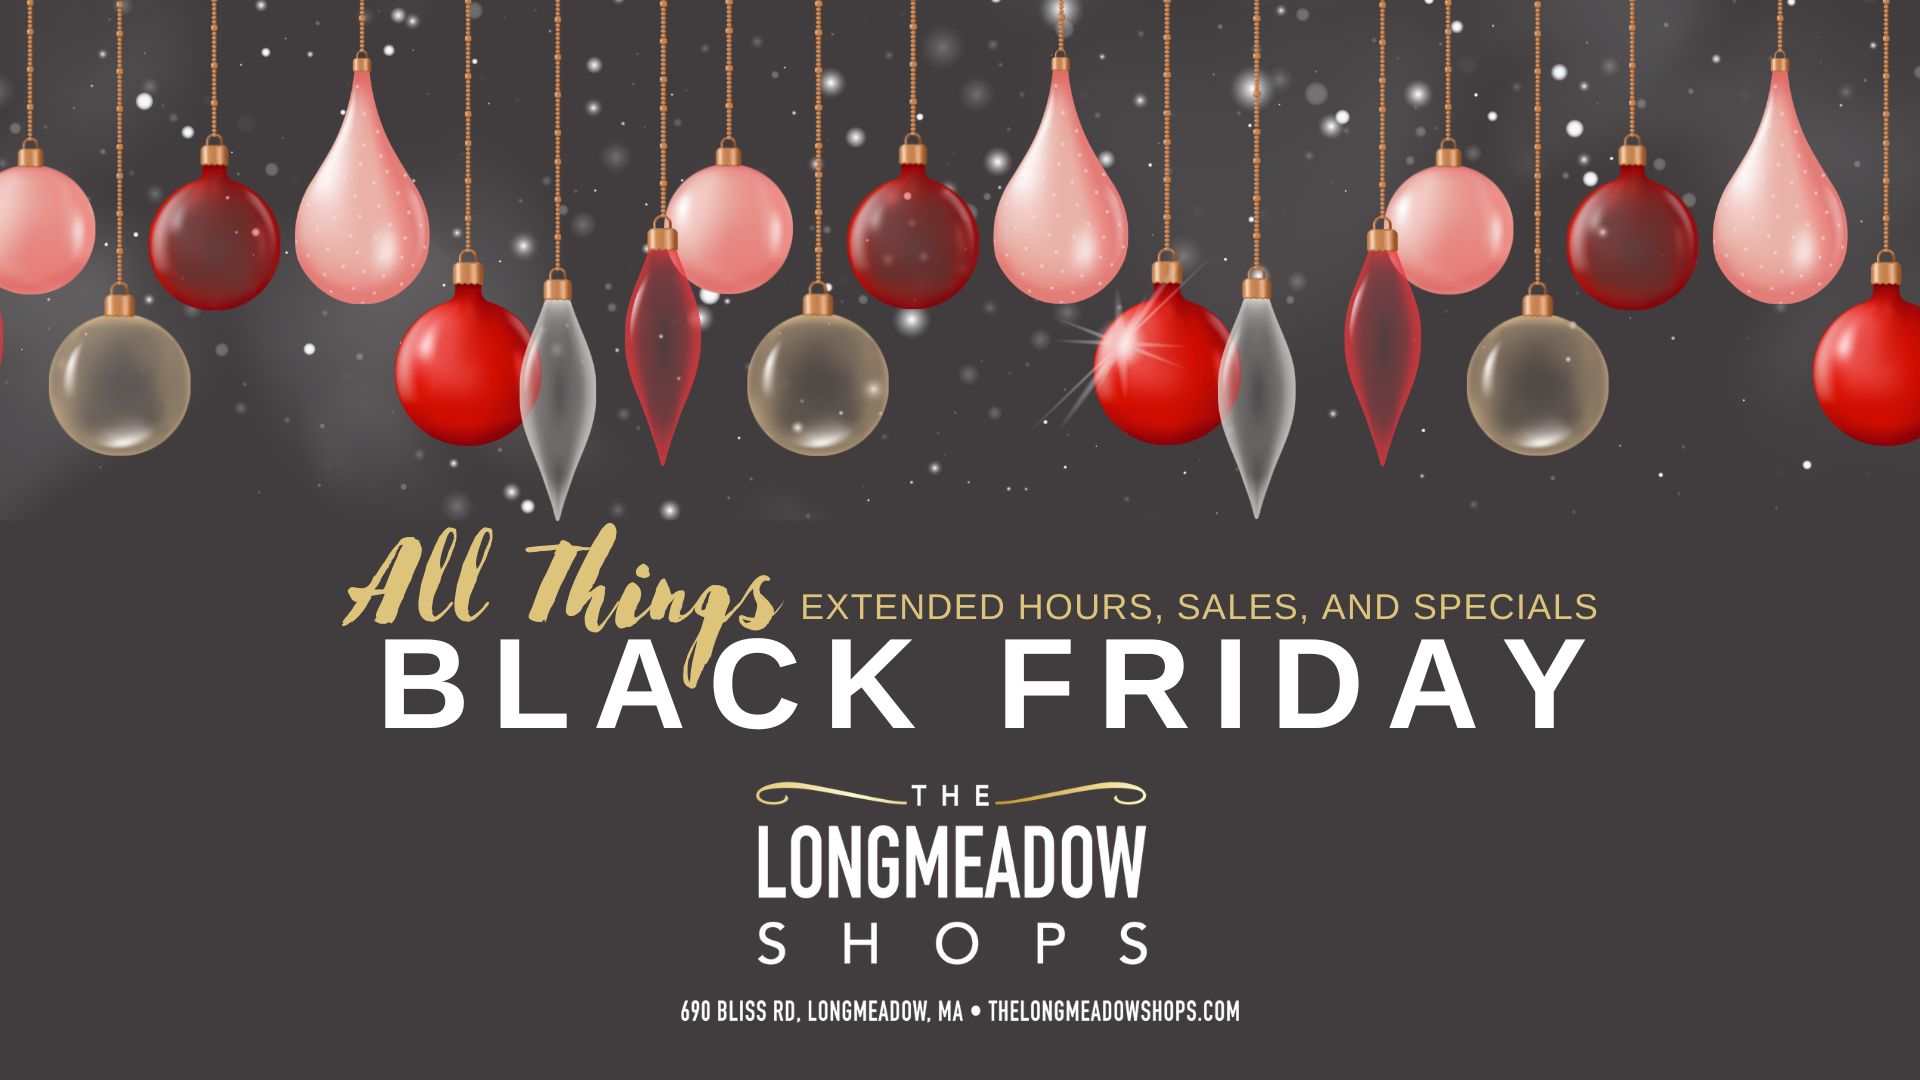 Black Friday and Thanksgiving Weekend